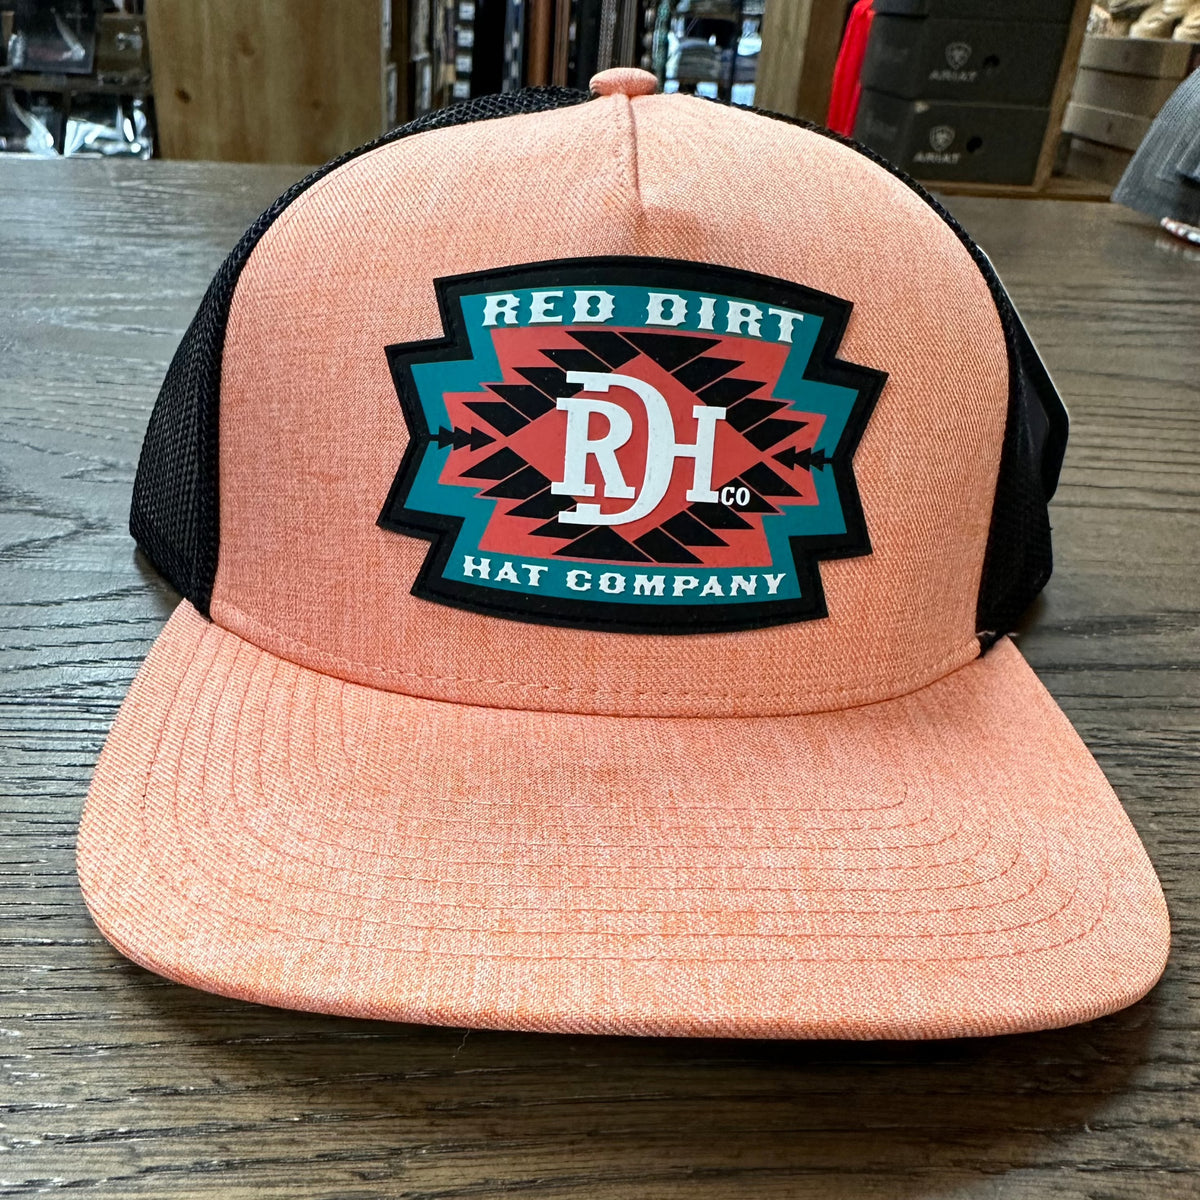 Red Dirt Hat Co. "Watermelon Aztec" Hat in Coral/Black